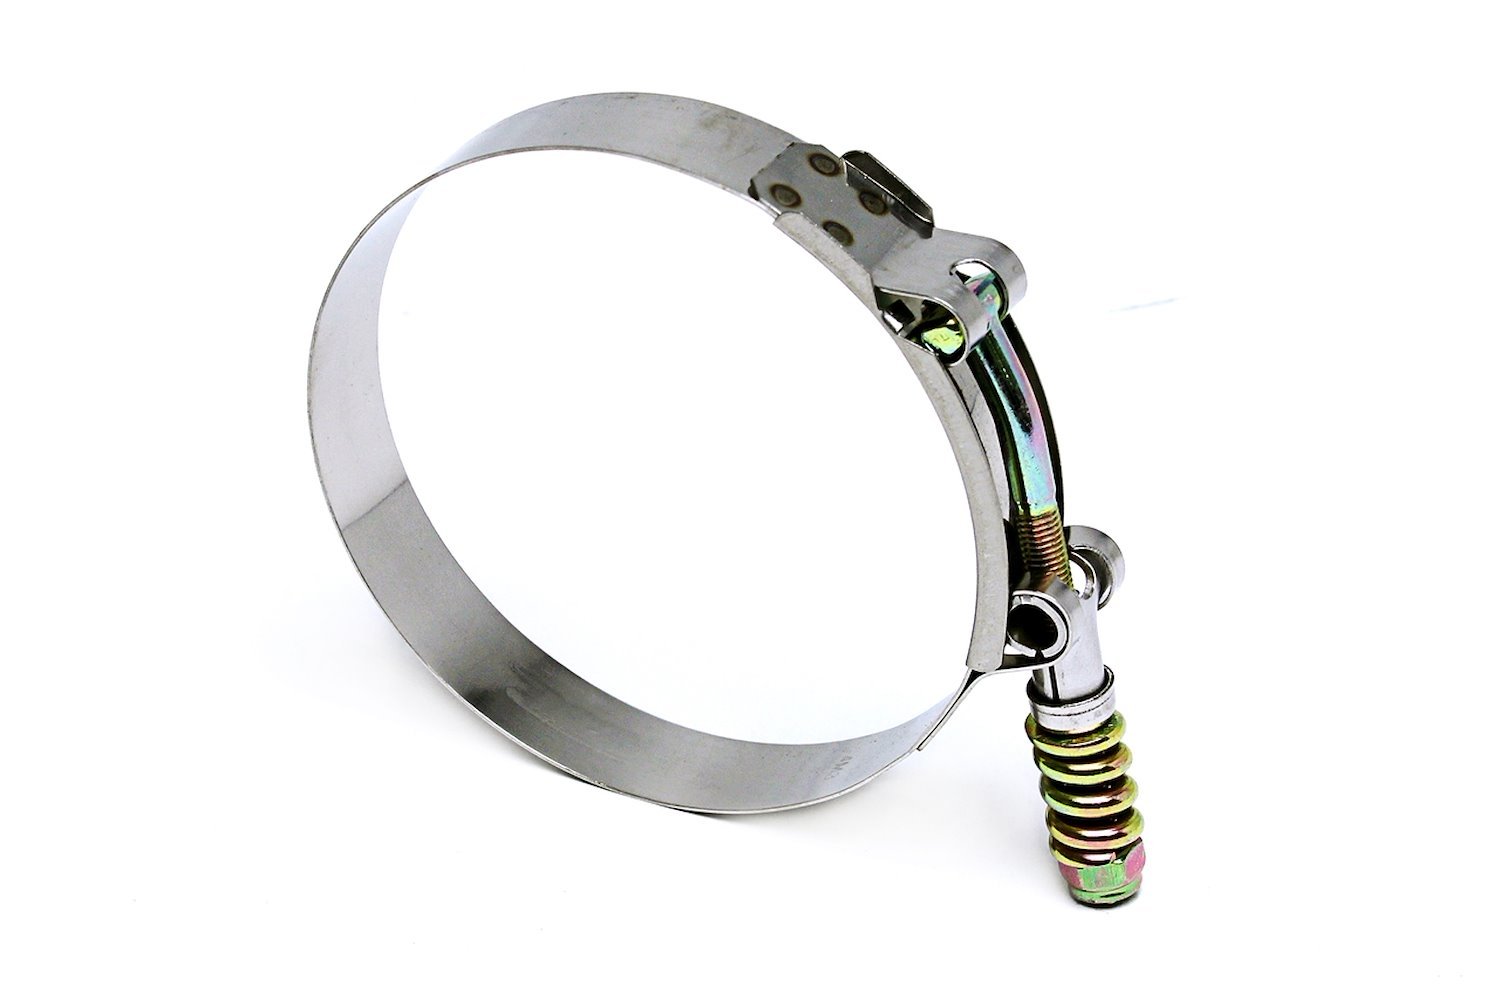 SLTC-225 Stainless Steel Spring Loaded T-Bolt Hose Clamp, Size #44, Range: 2.25 in.-2.56 in.